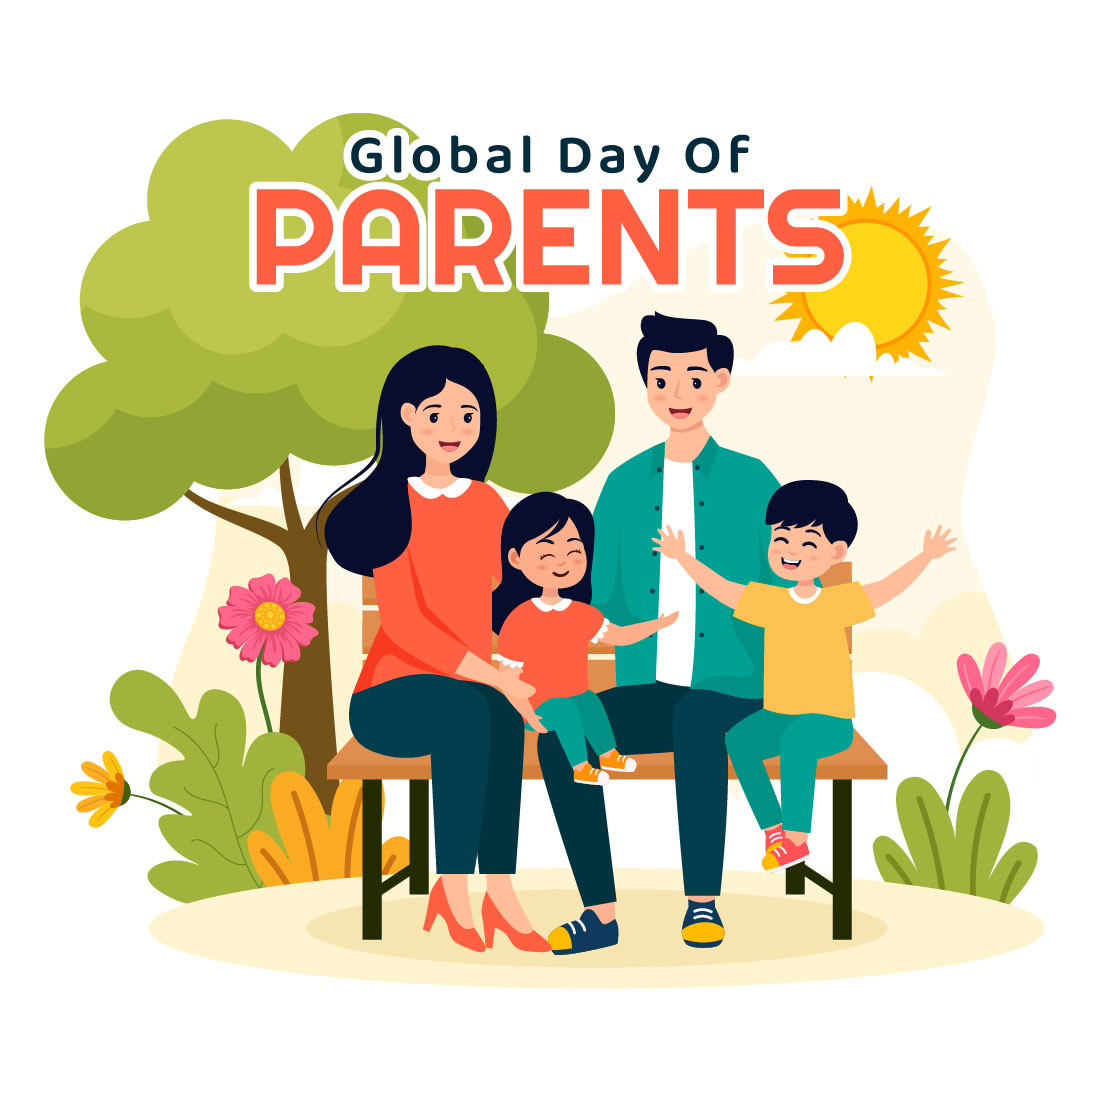 12 Global Day of Parents Illustration cover image.